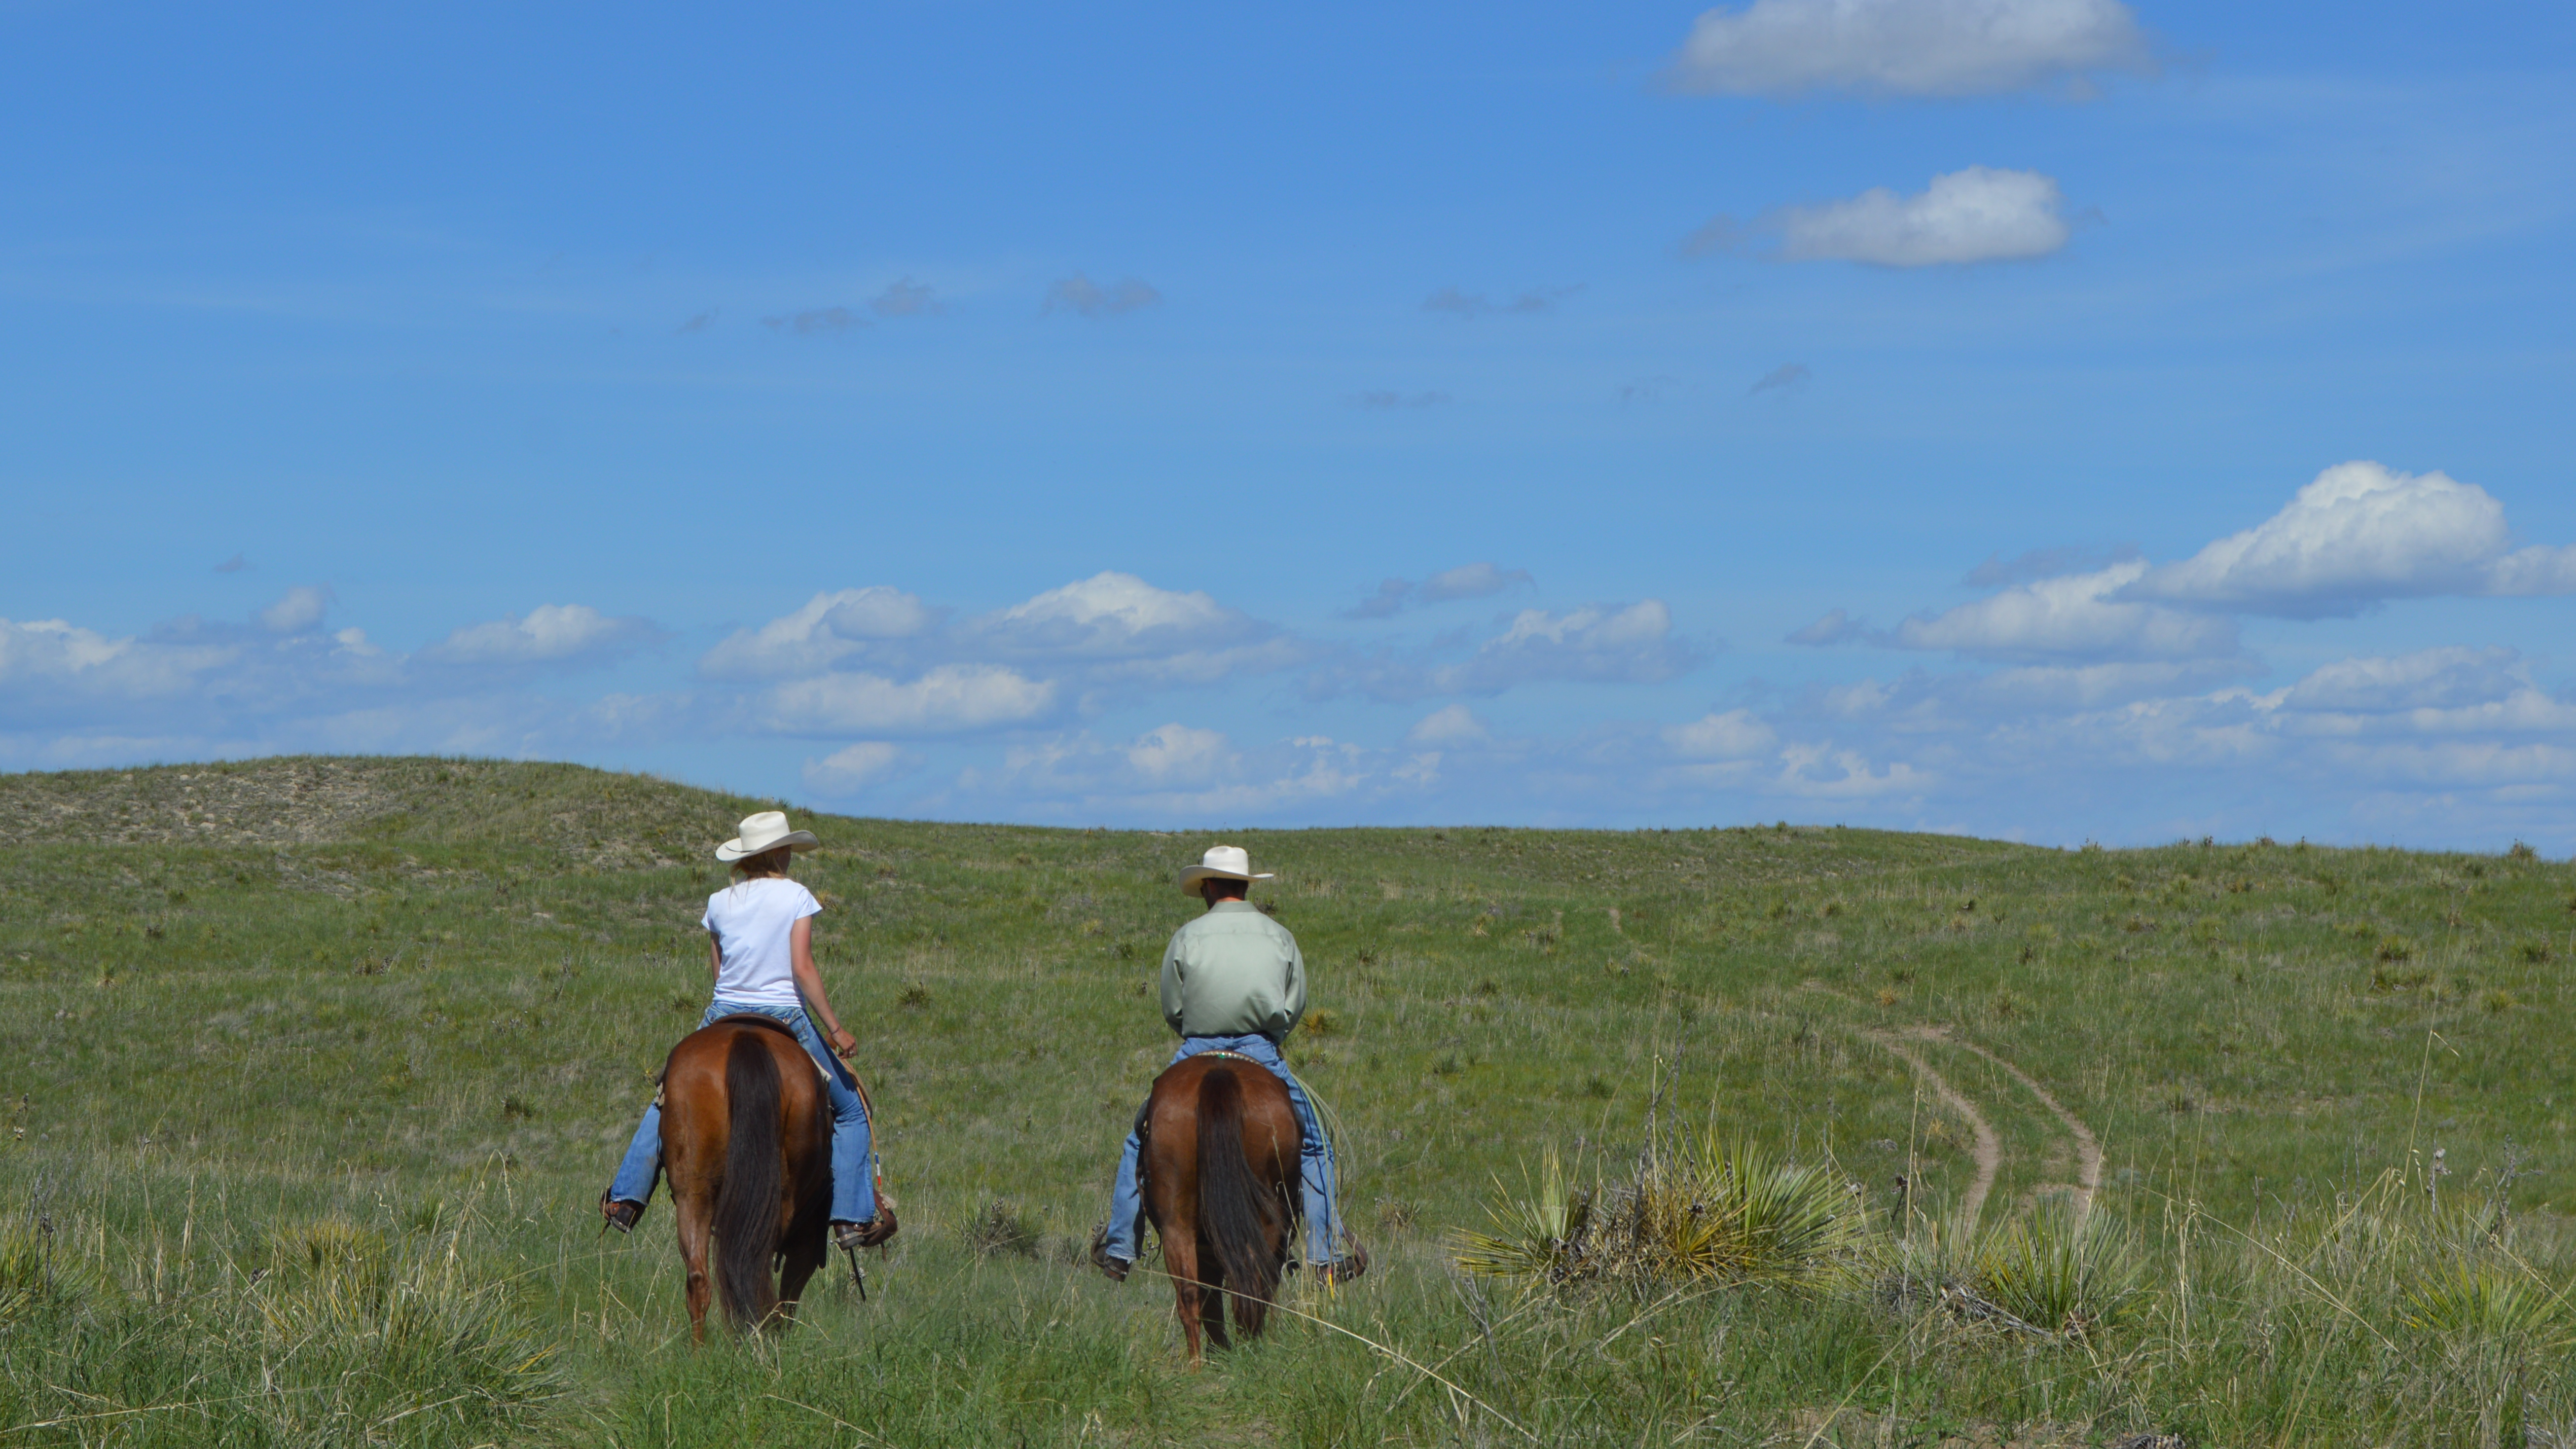  A relaxing horseback ride in wide open spaces can be a healthy avenue for recreation and improving wellness through physical fitness. (Mary Crawford photo / NCTA News)  